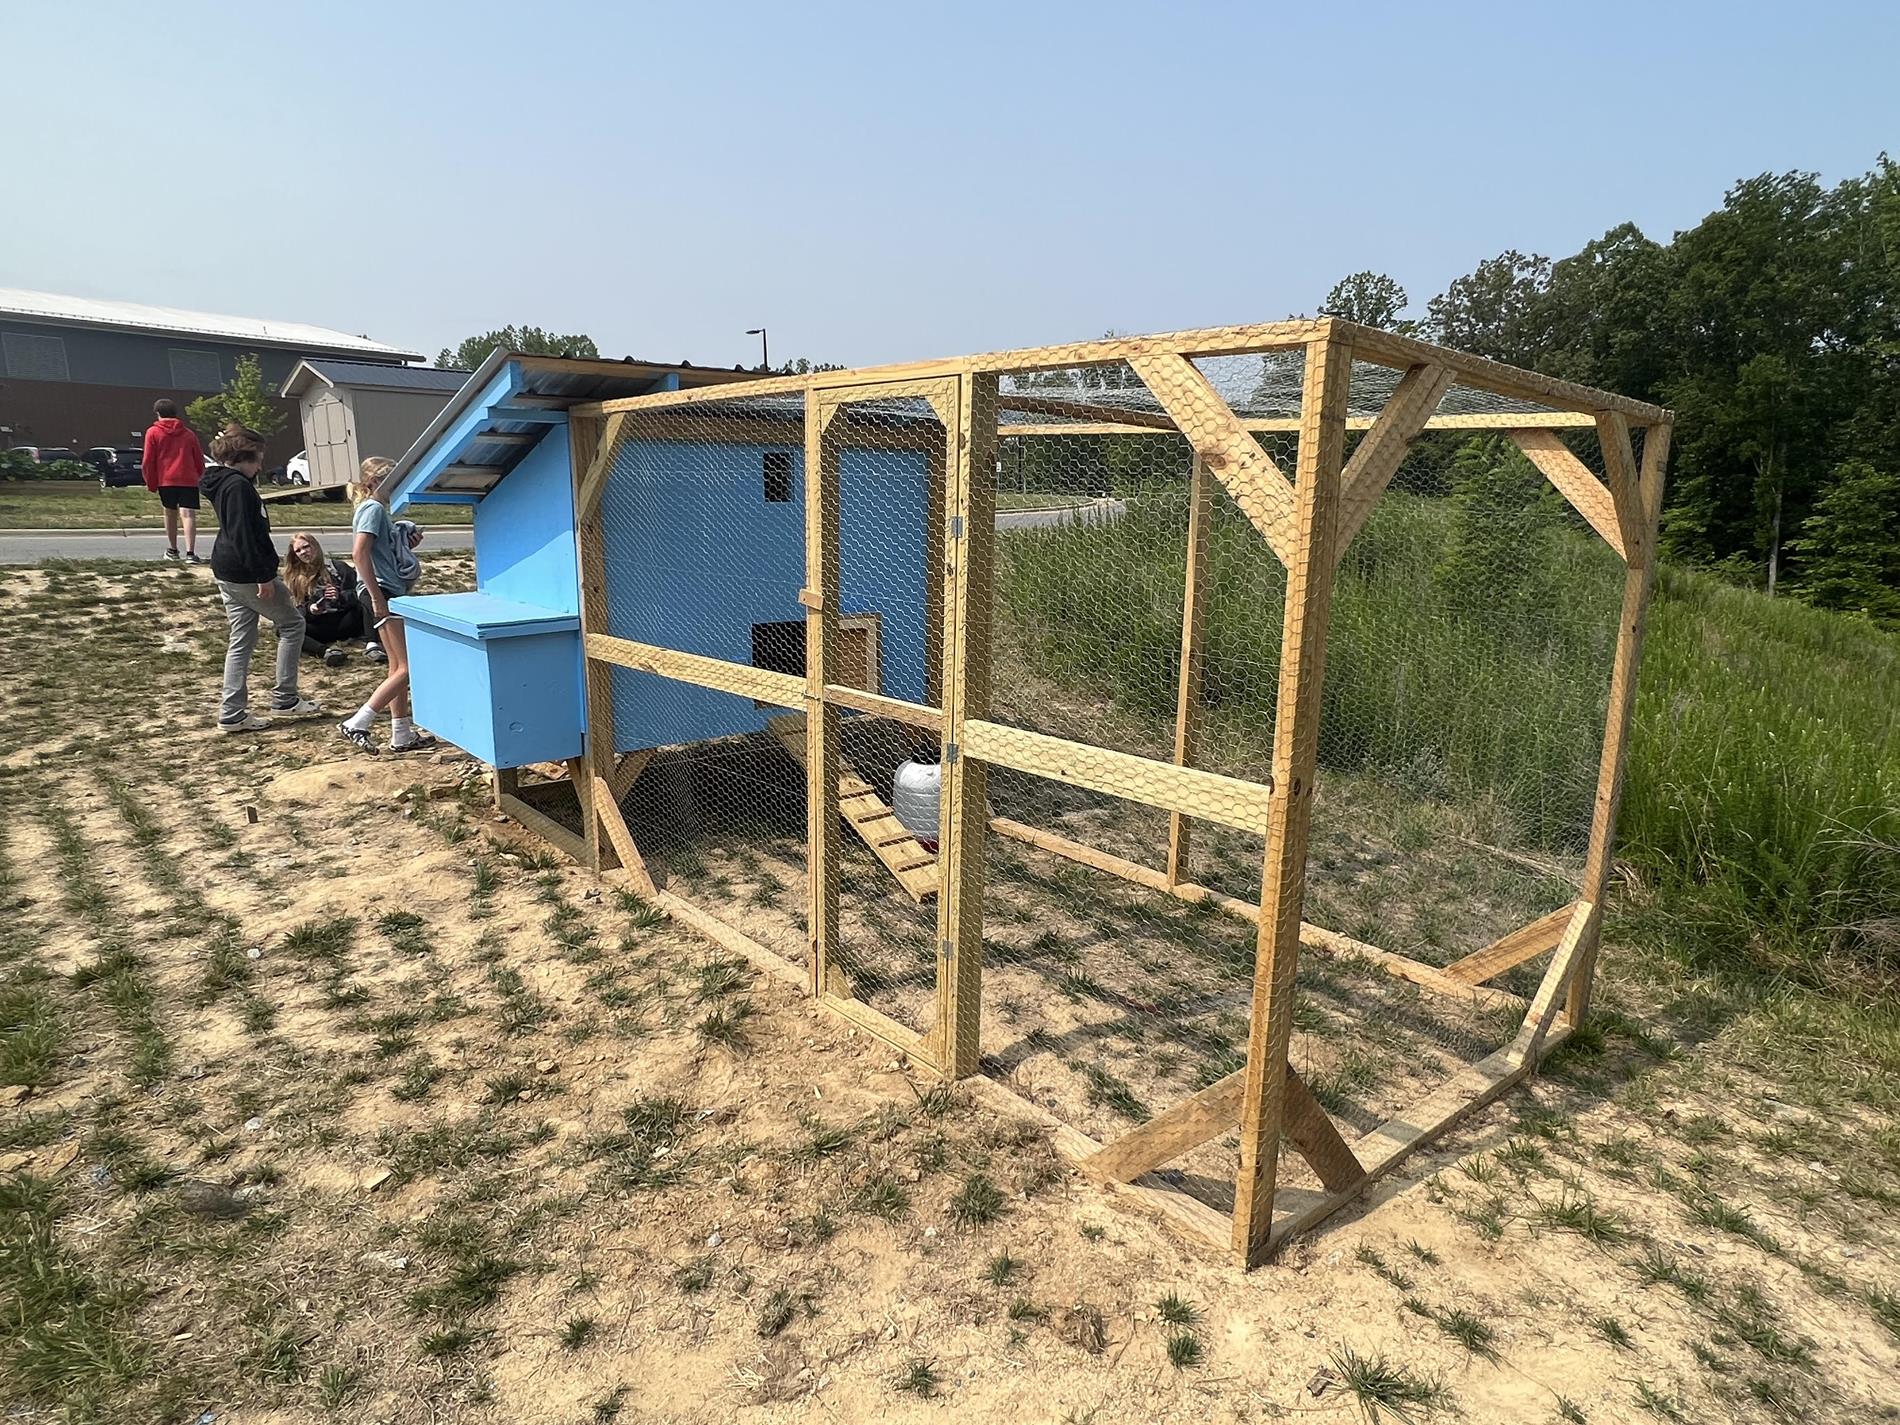 photo of blue chicken coop outside the school